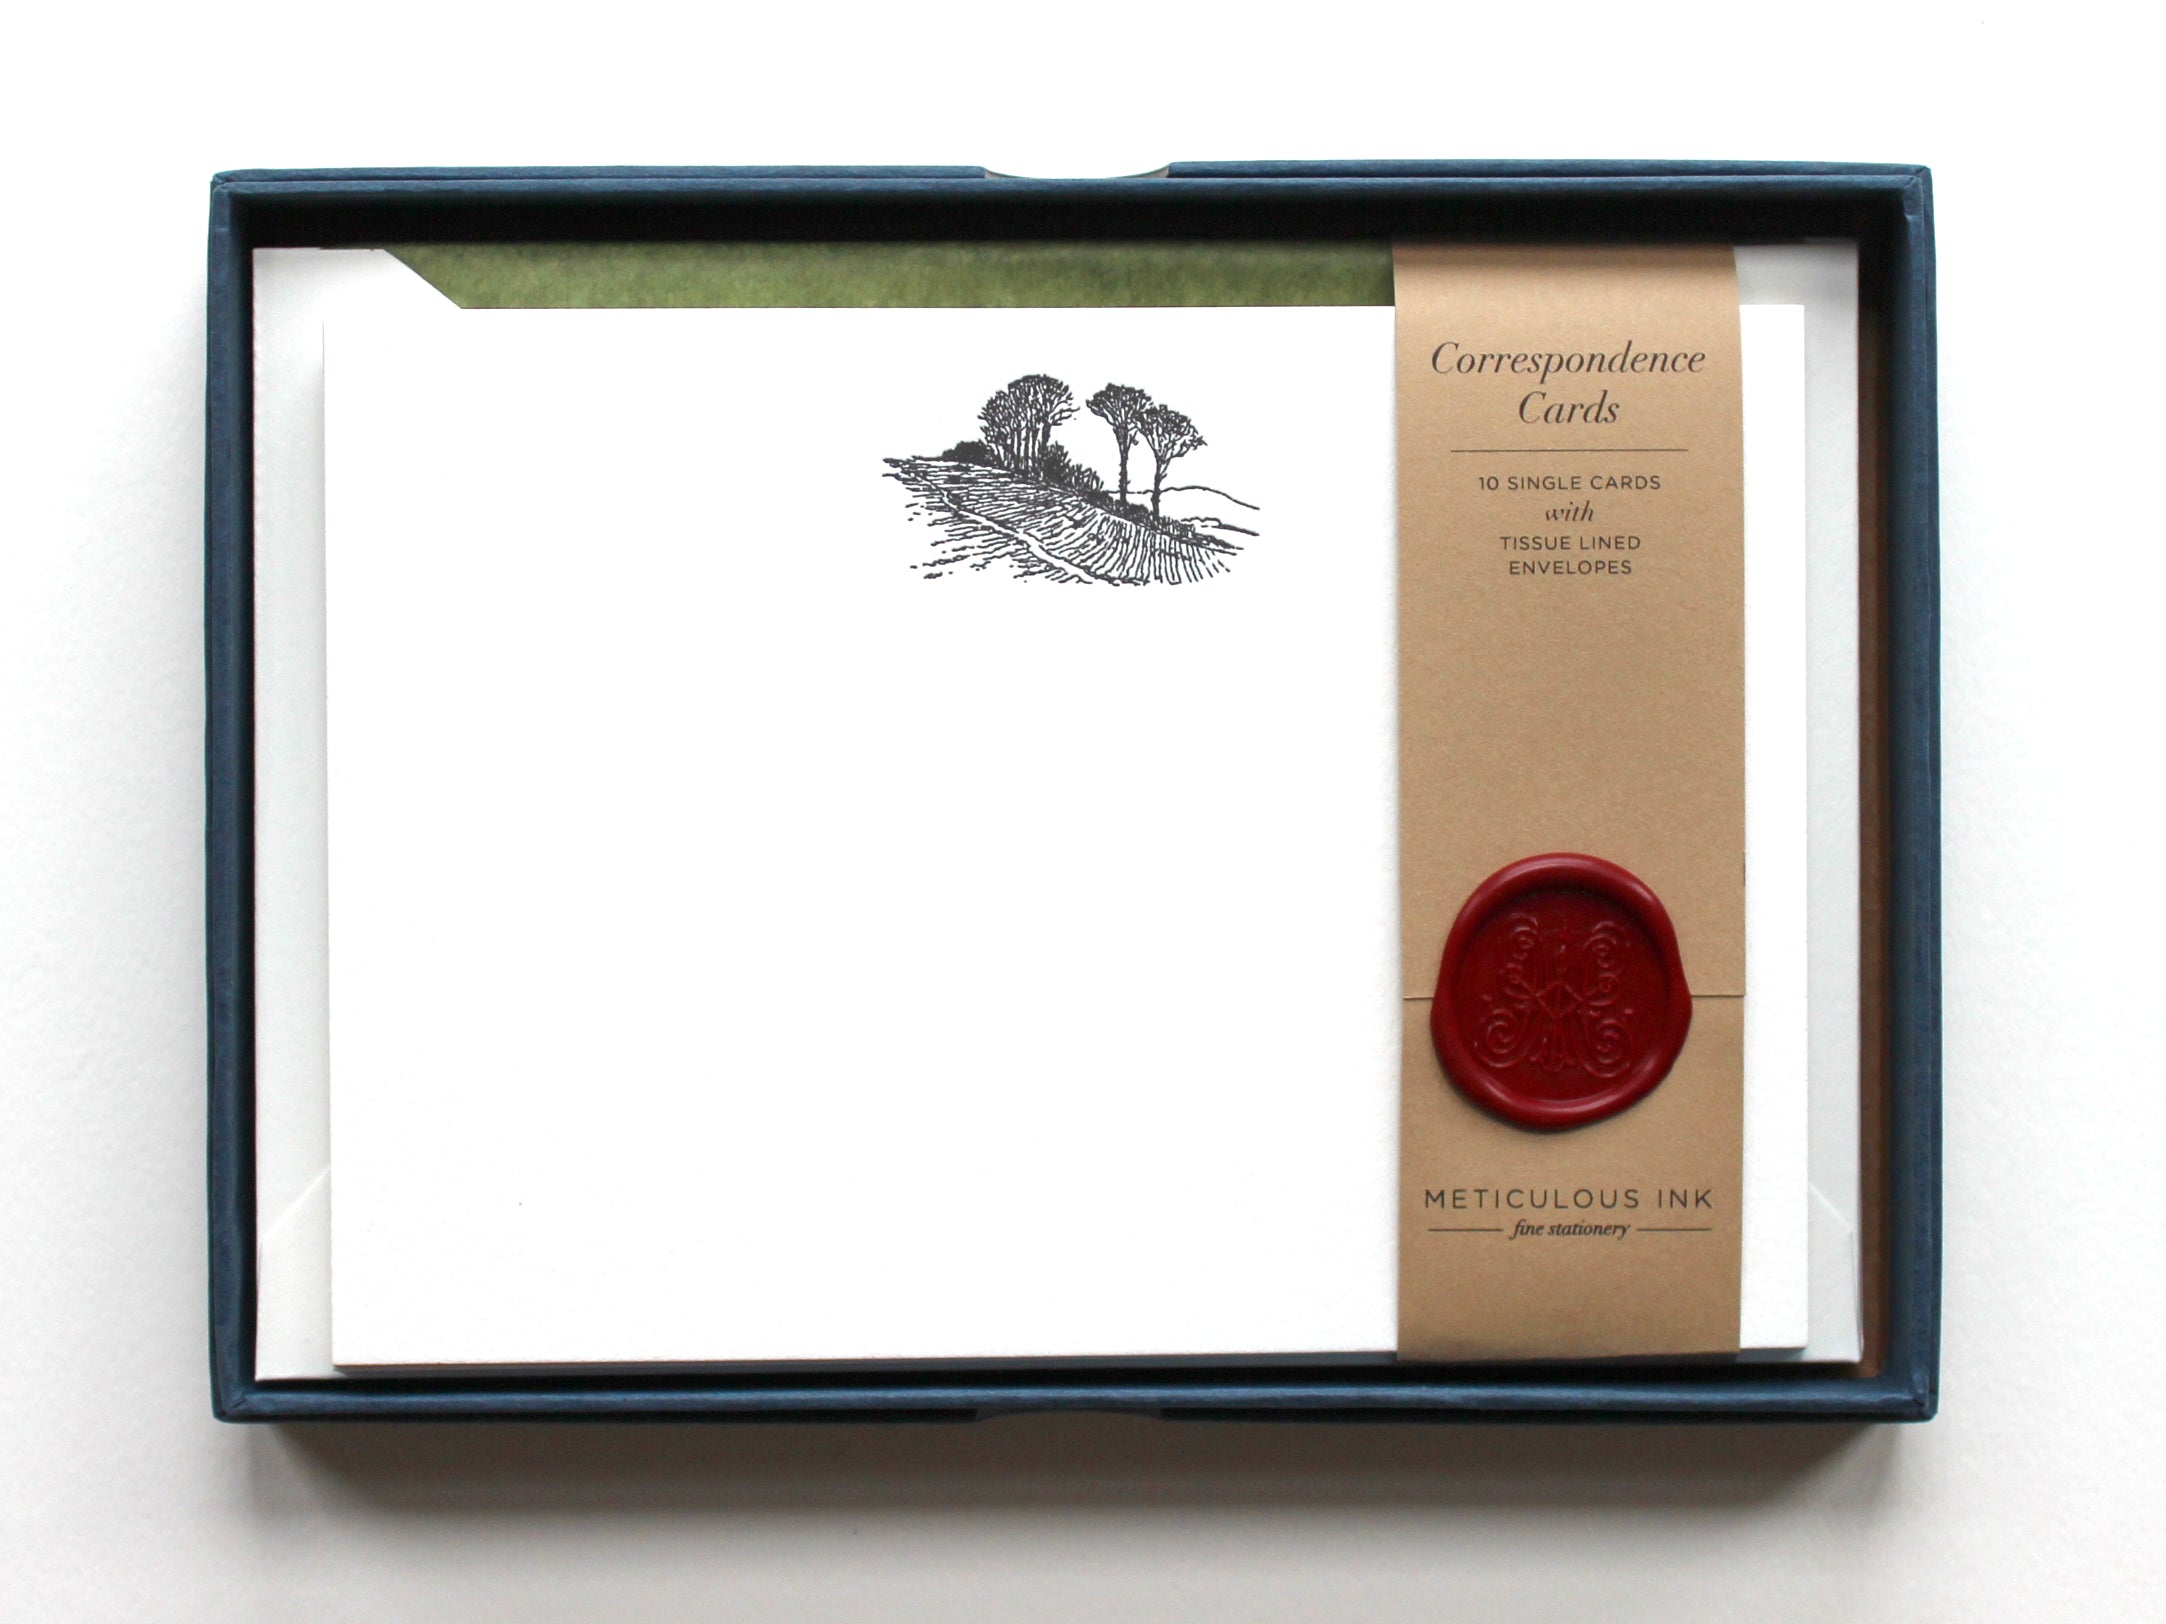 Landscape Letterpress Correspondence Cards in display box with wax seal